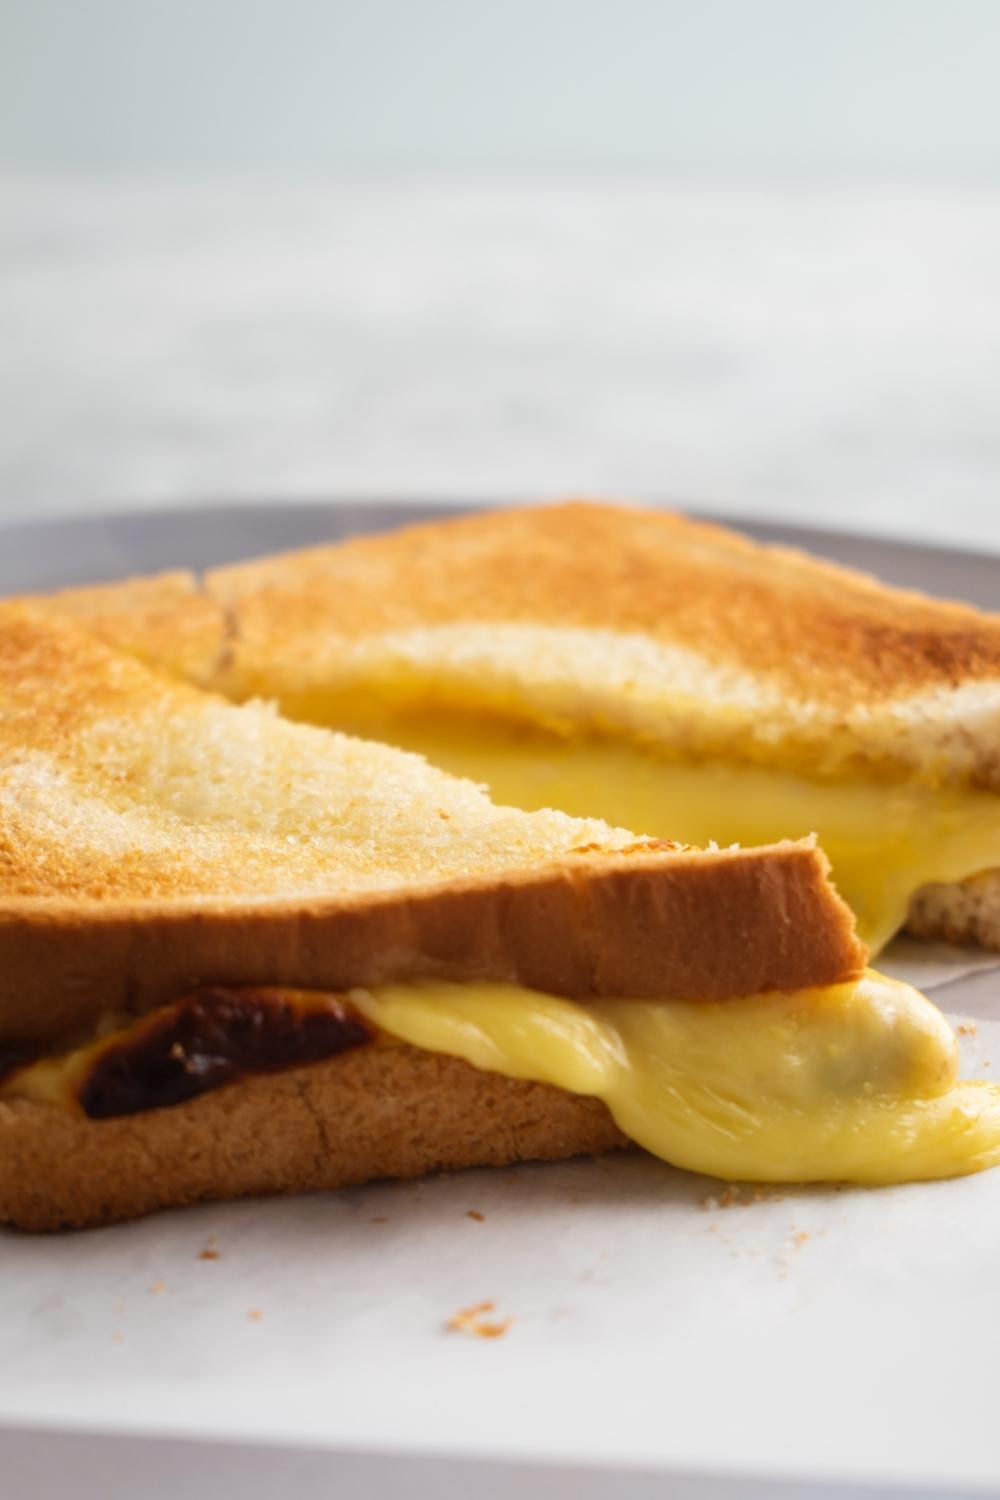 A close-up of an air fryer grilled cheese sandwich sliced in half with melted cheese overflowing the slices.